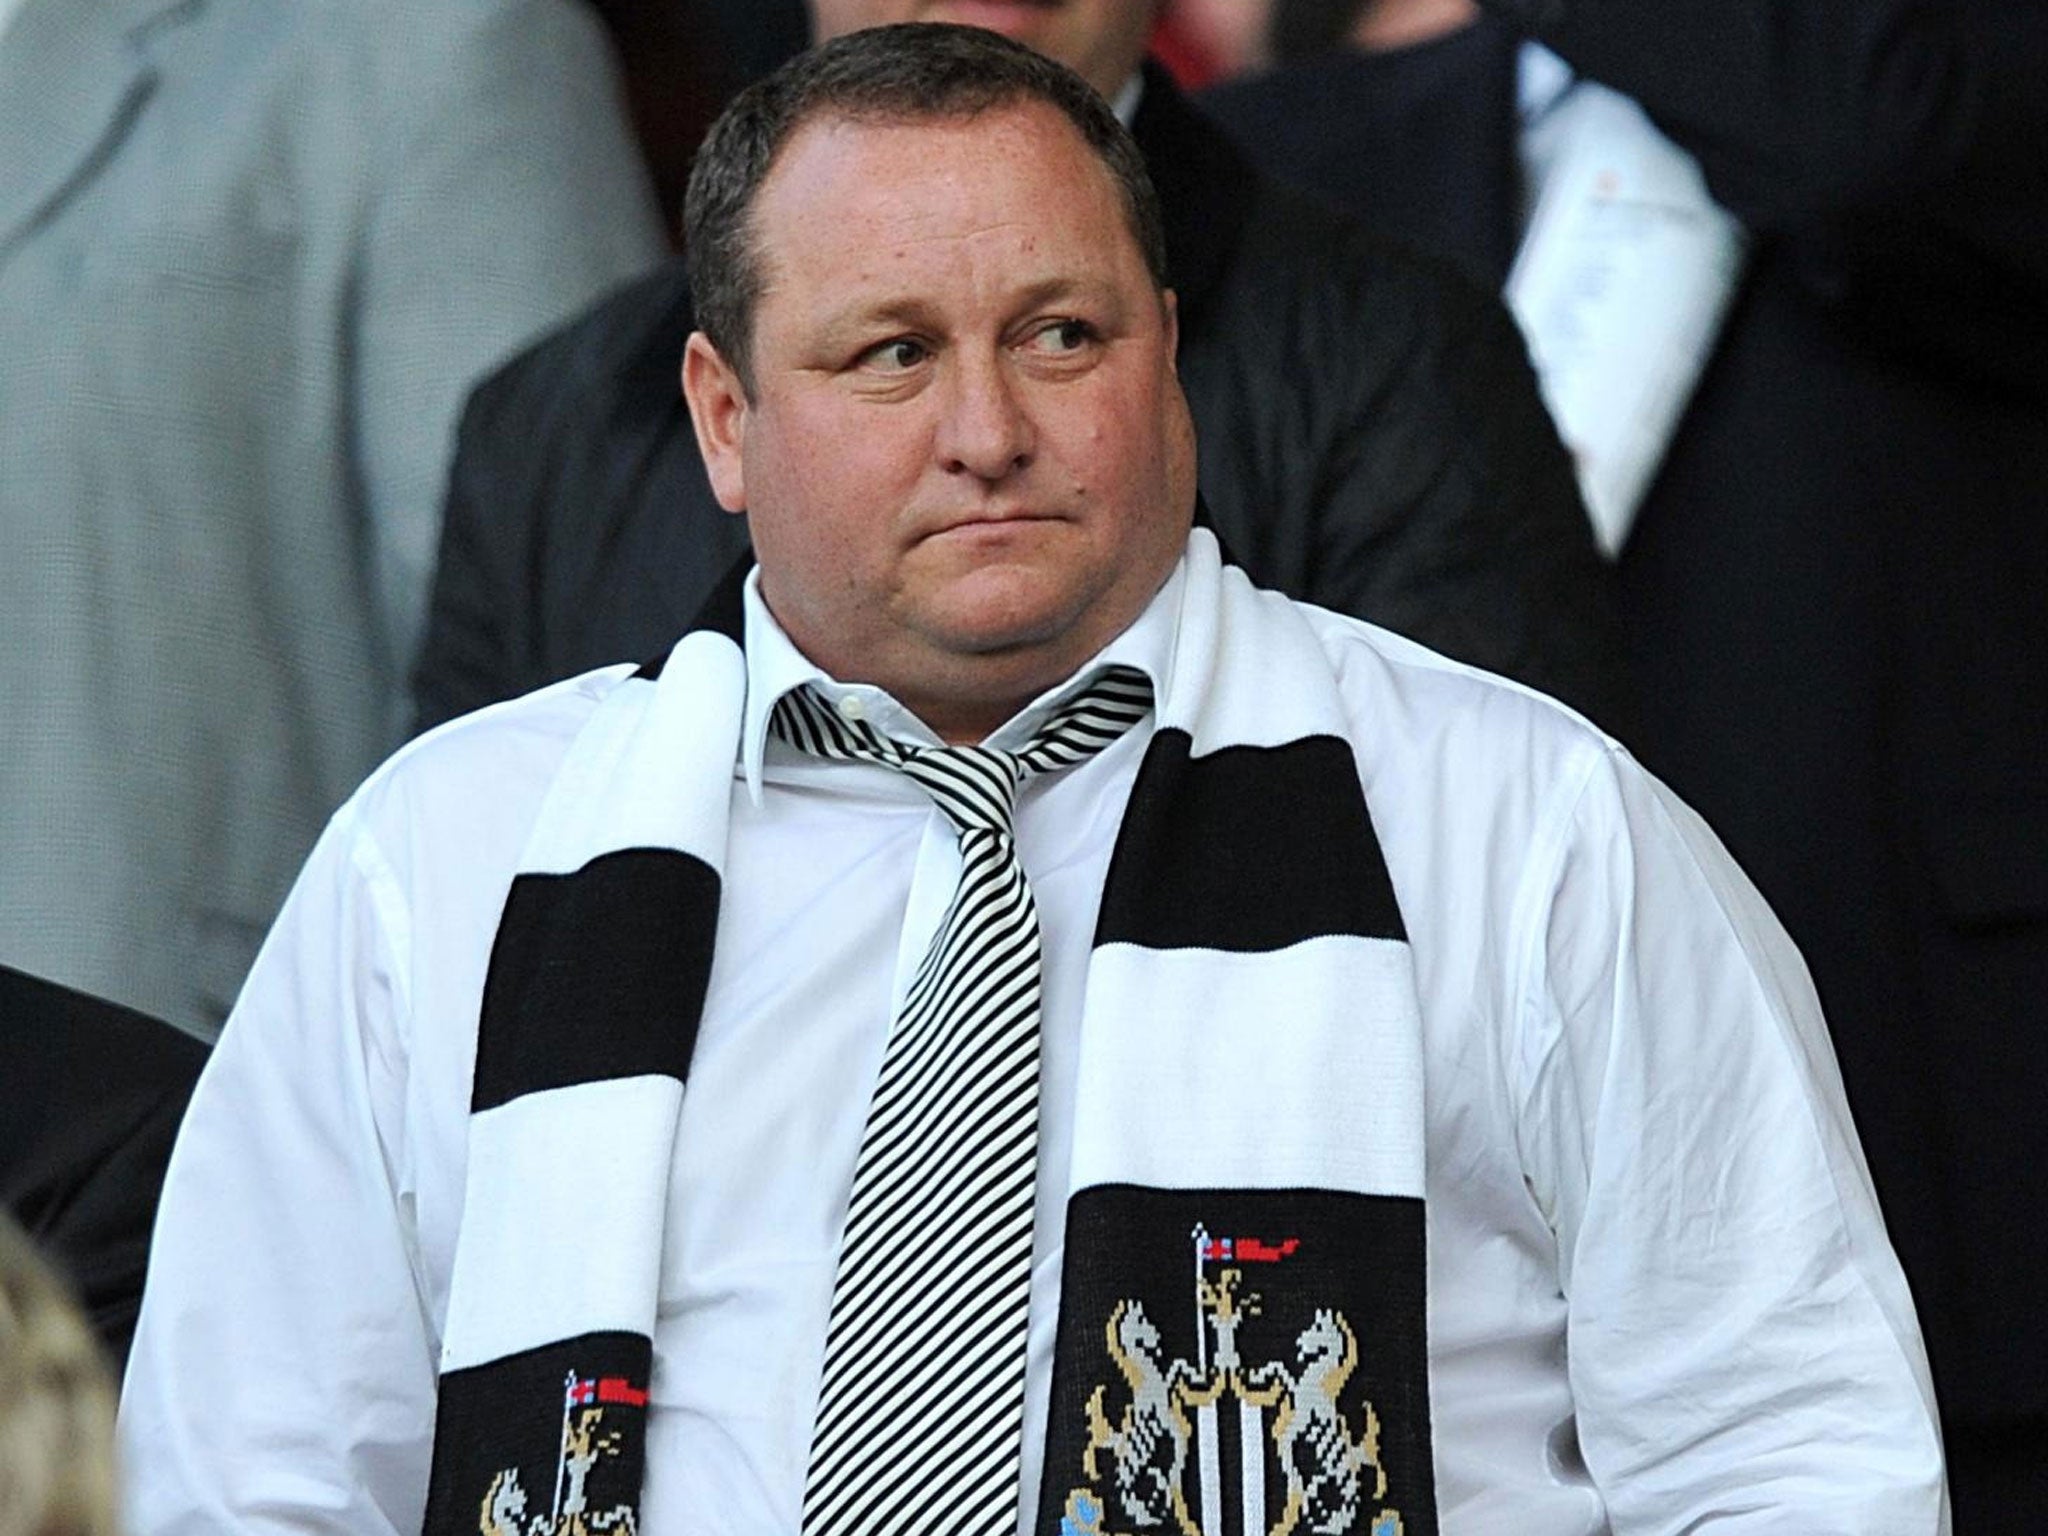 Mike Ashley, who also owns Newcastle United